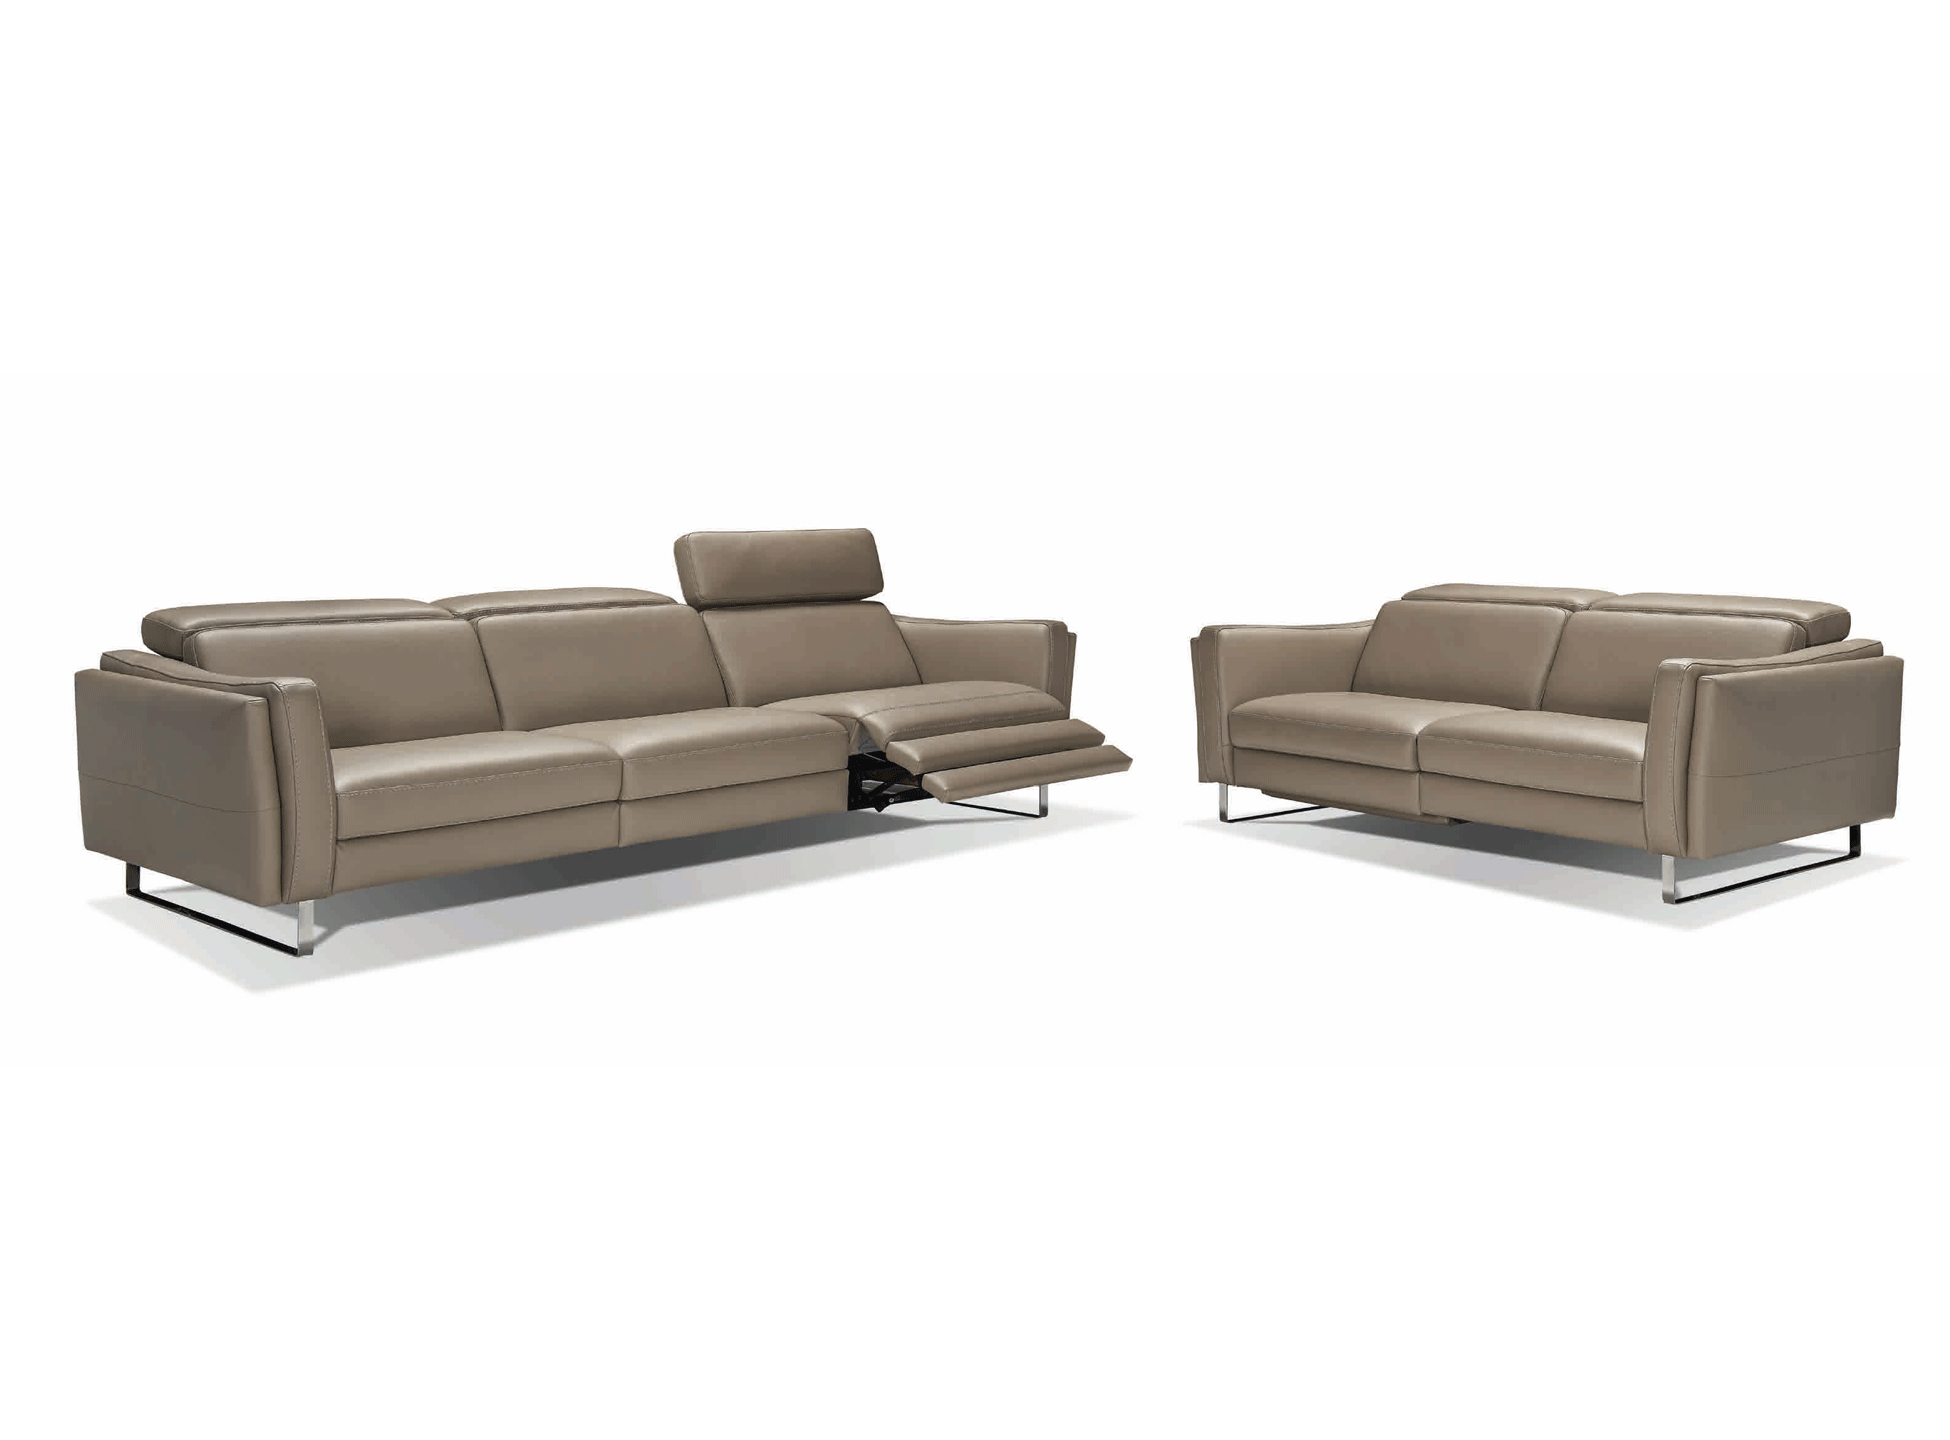 Living Room Furniture Sleepers Sofas Loveseats and Chairs Belluno Living room